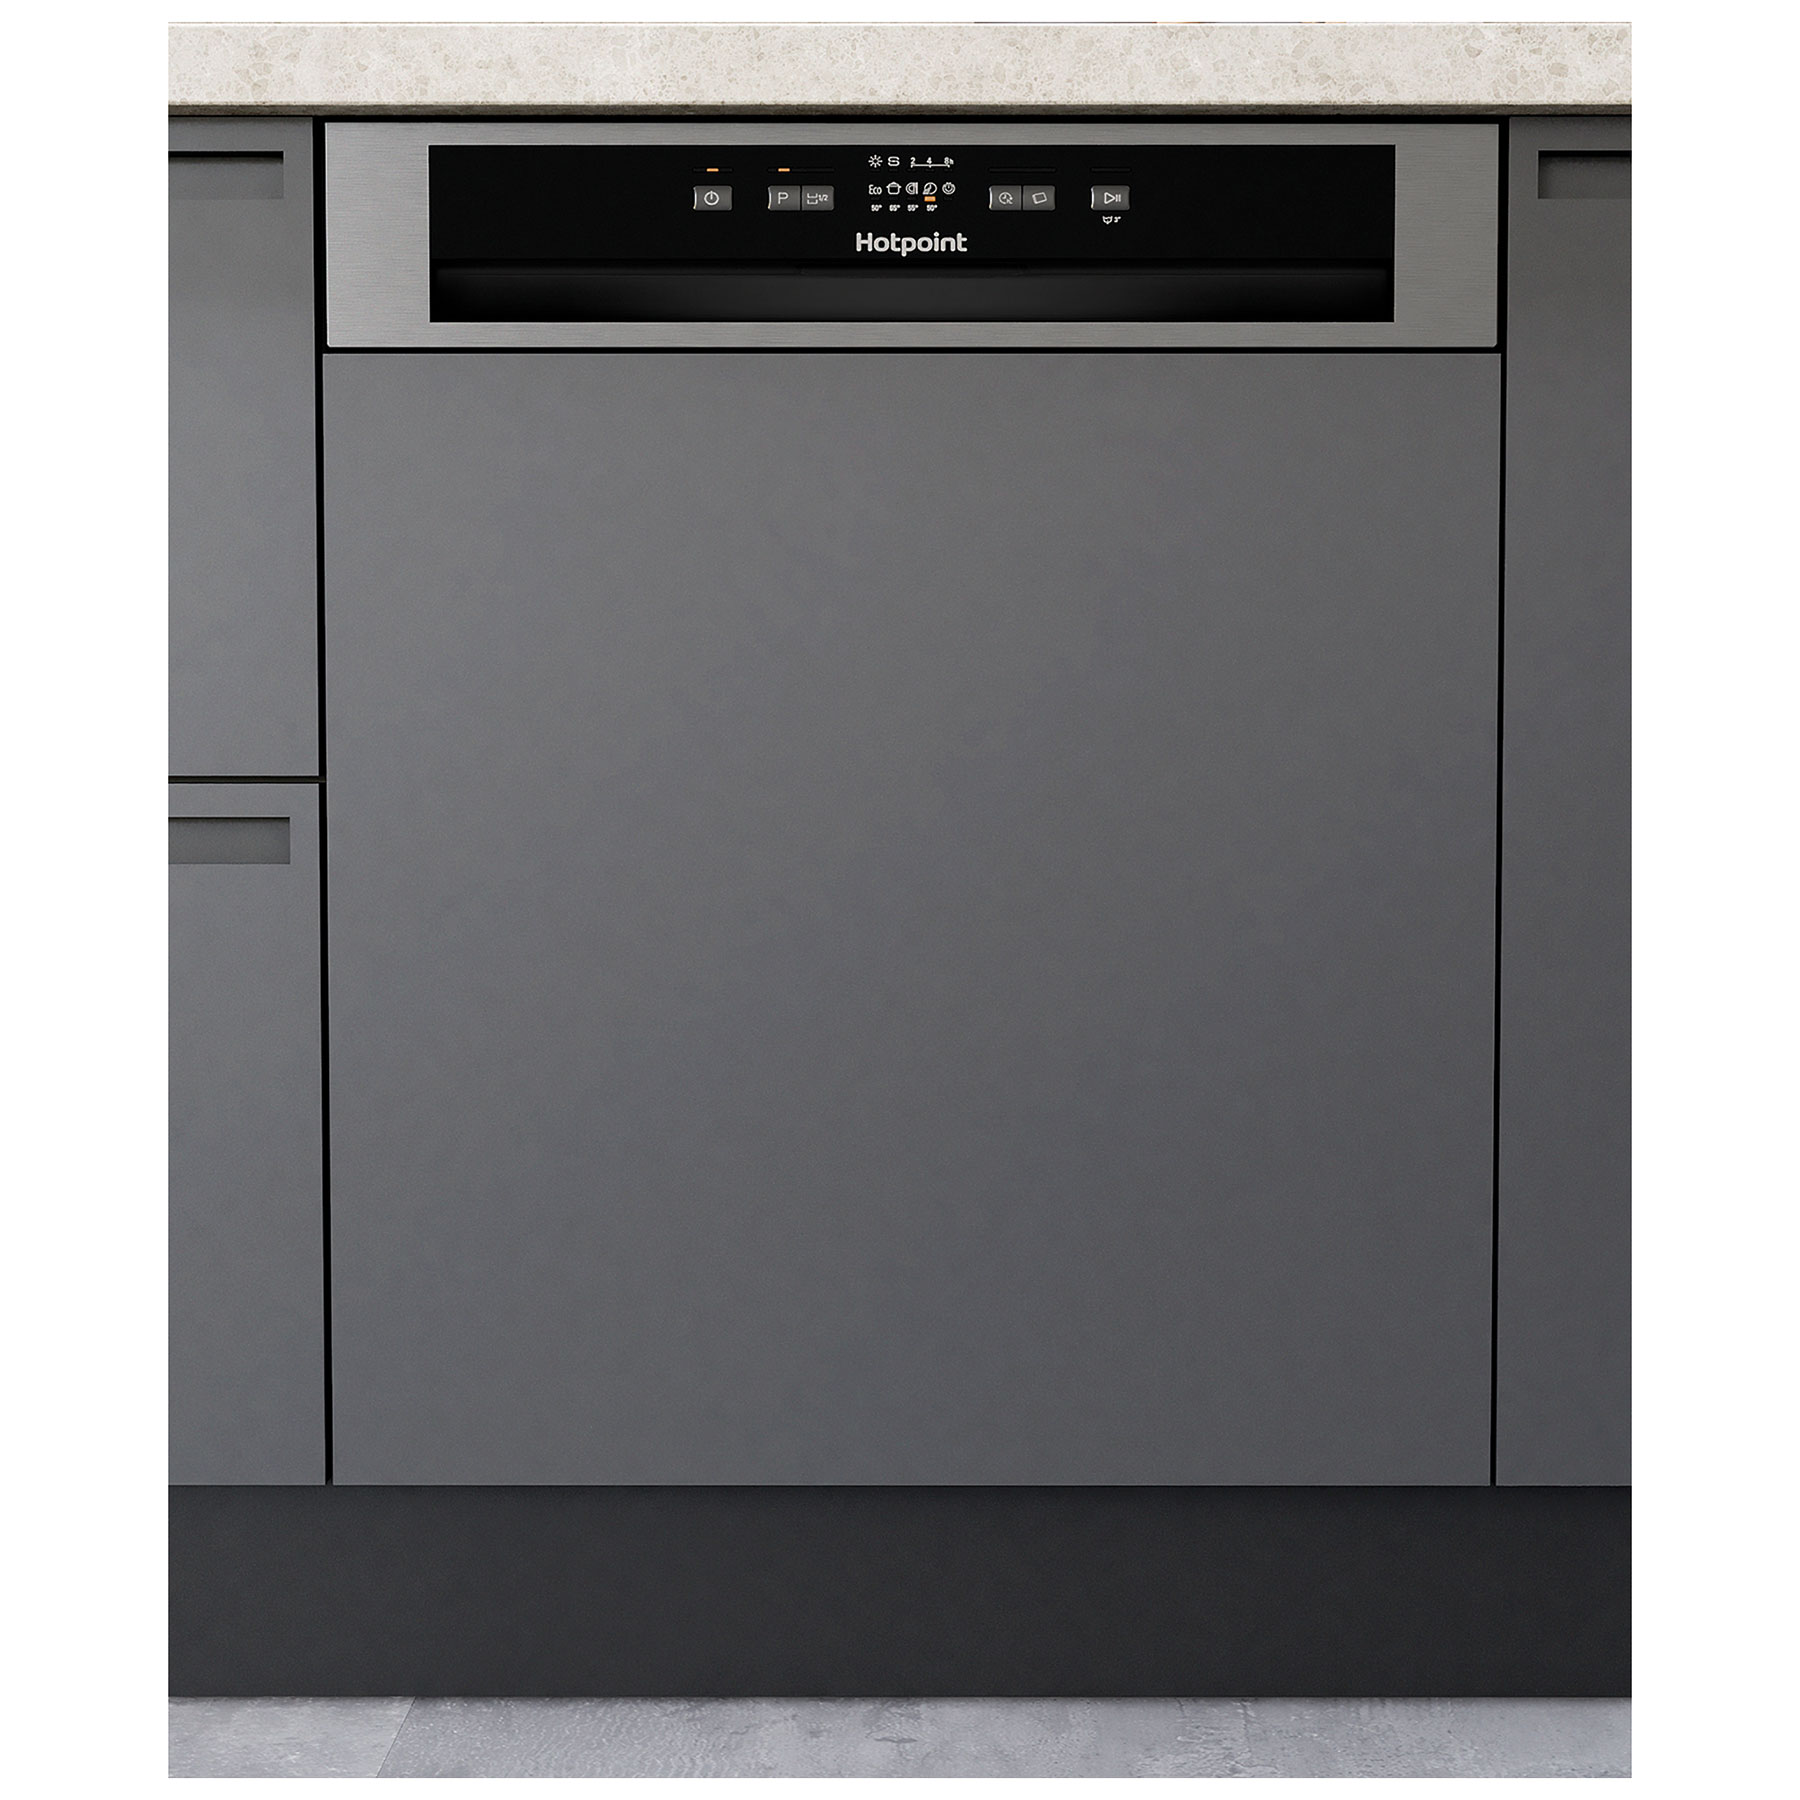 Image of Hotpoint H3BL626XUK 60cm Semi Integrated Dishwasher 14 Place E Rated